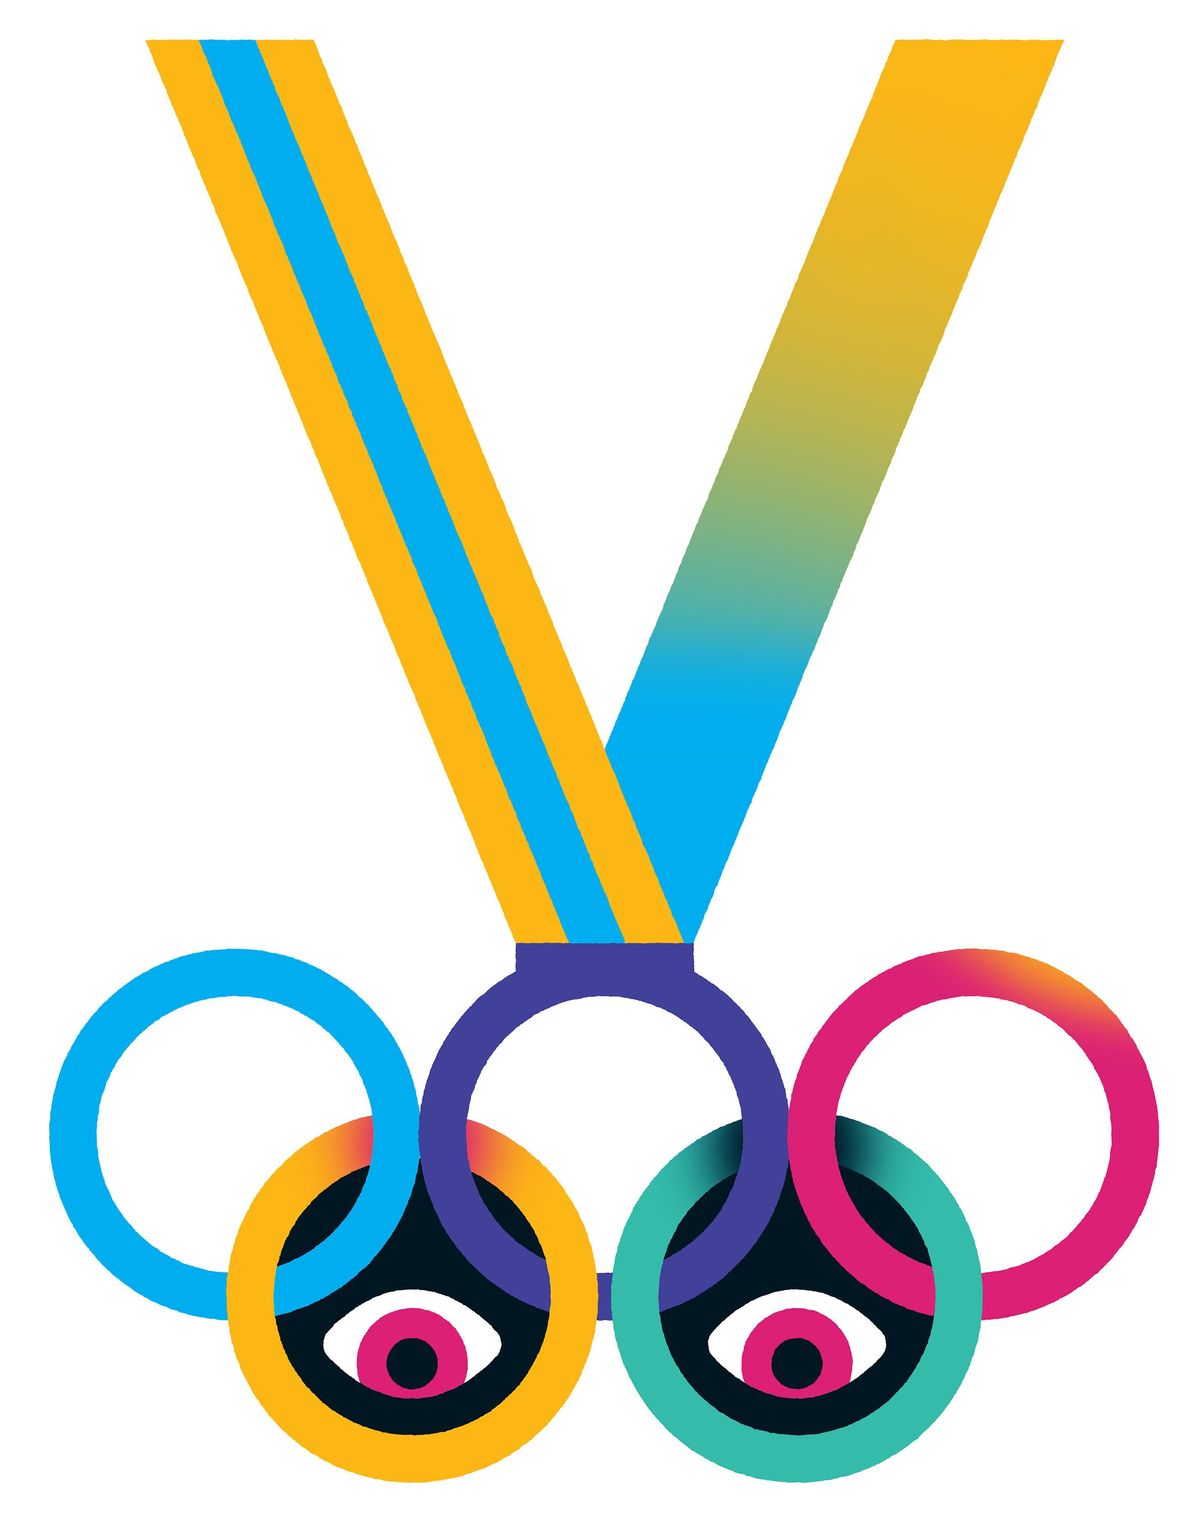 An illustration of the olympics rings with eyes in the bottom two rings.  